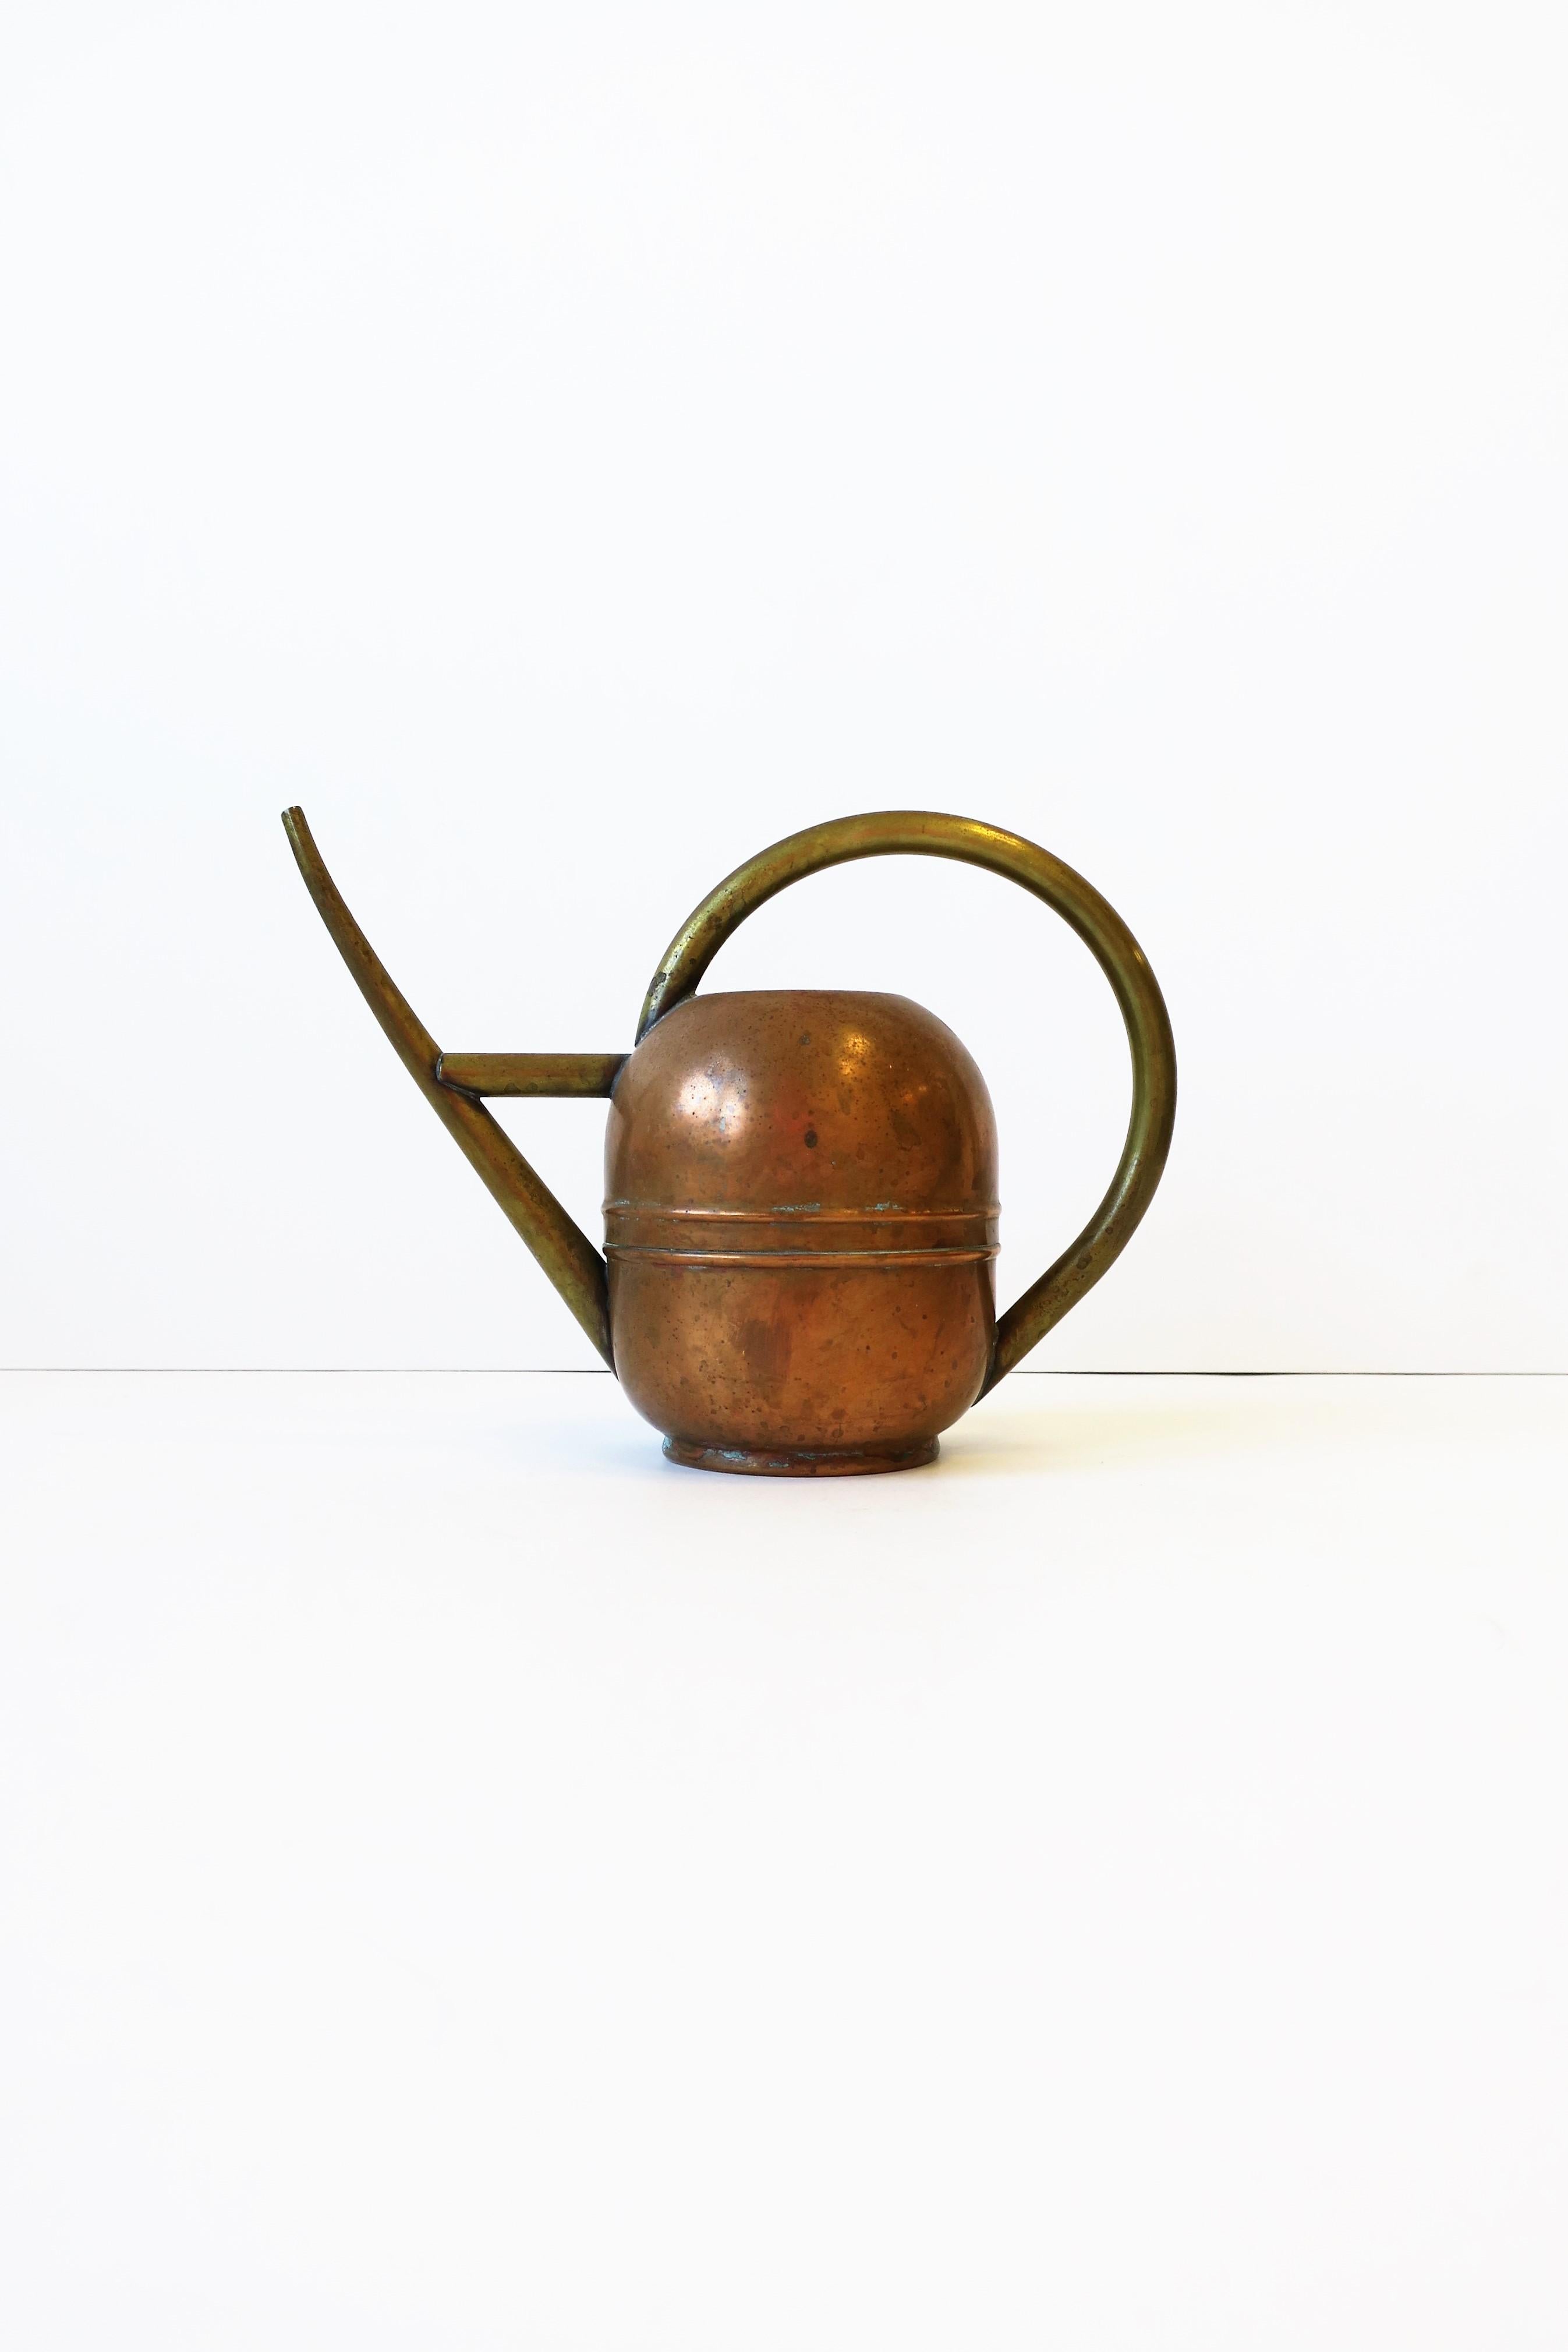 A beautiful American Art Deco period 1930s brass and copper watering can by the Chase Brass and Copper Company Inc., circa early 20th century, USA. Piece is beautifully designed; handle and spout are brass and container, copper. Great for